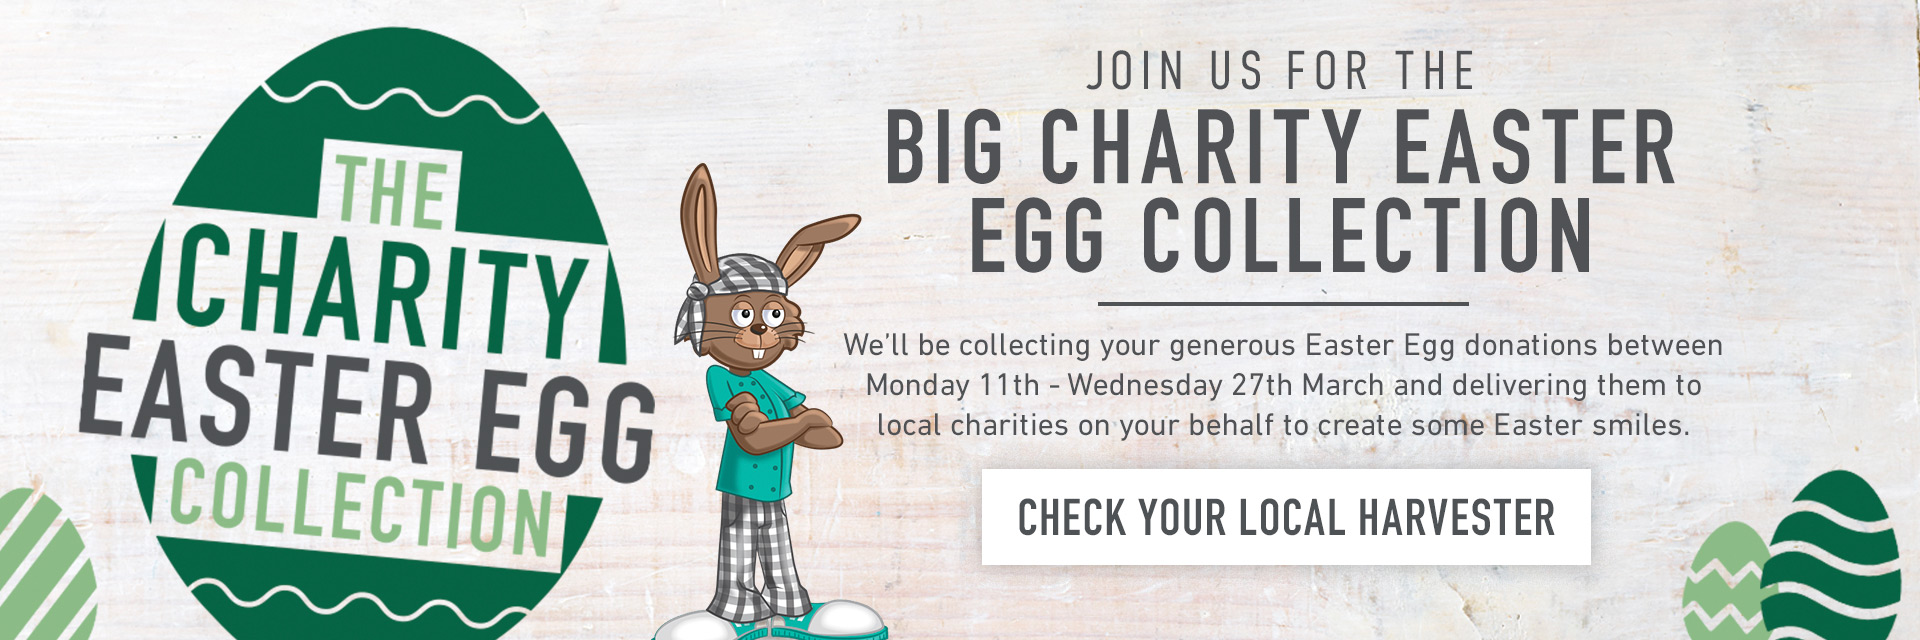 Easter Egg Collection at HORSE & GROOM SIDCUP 